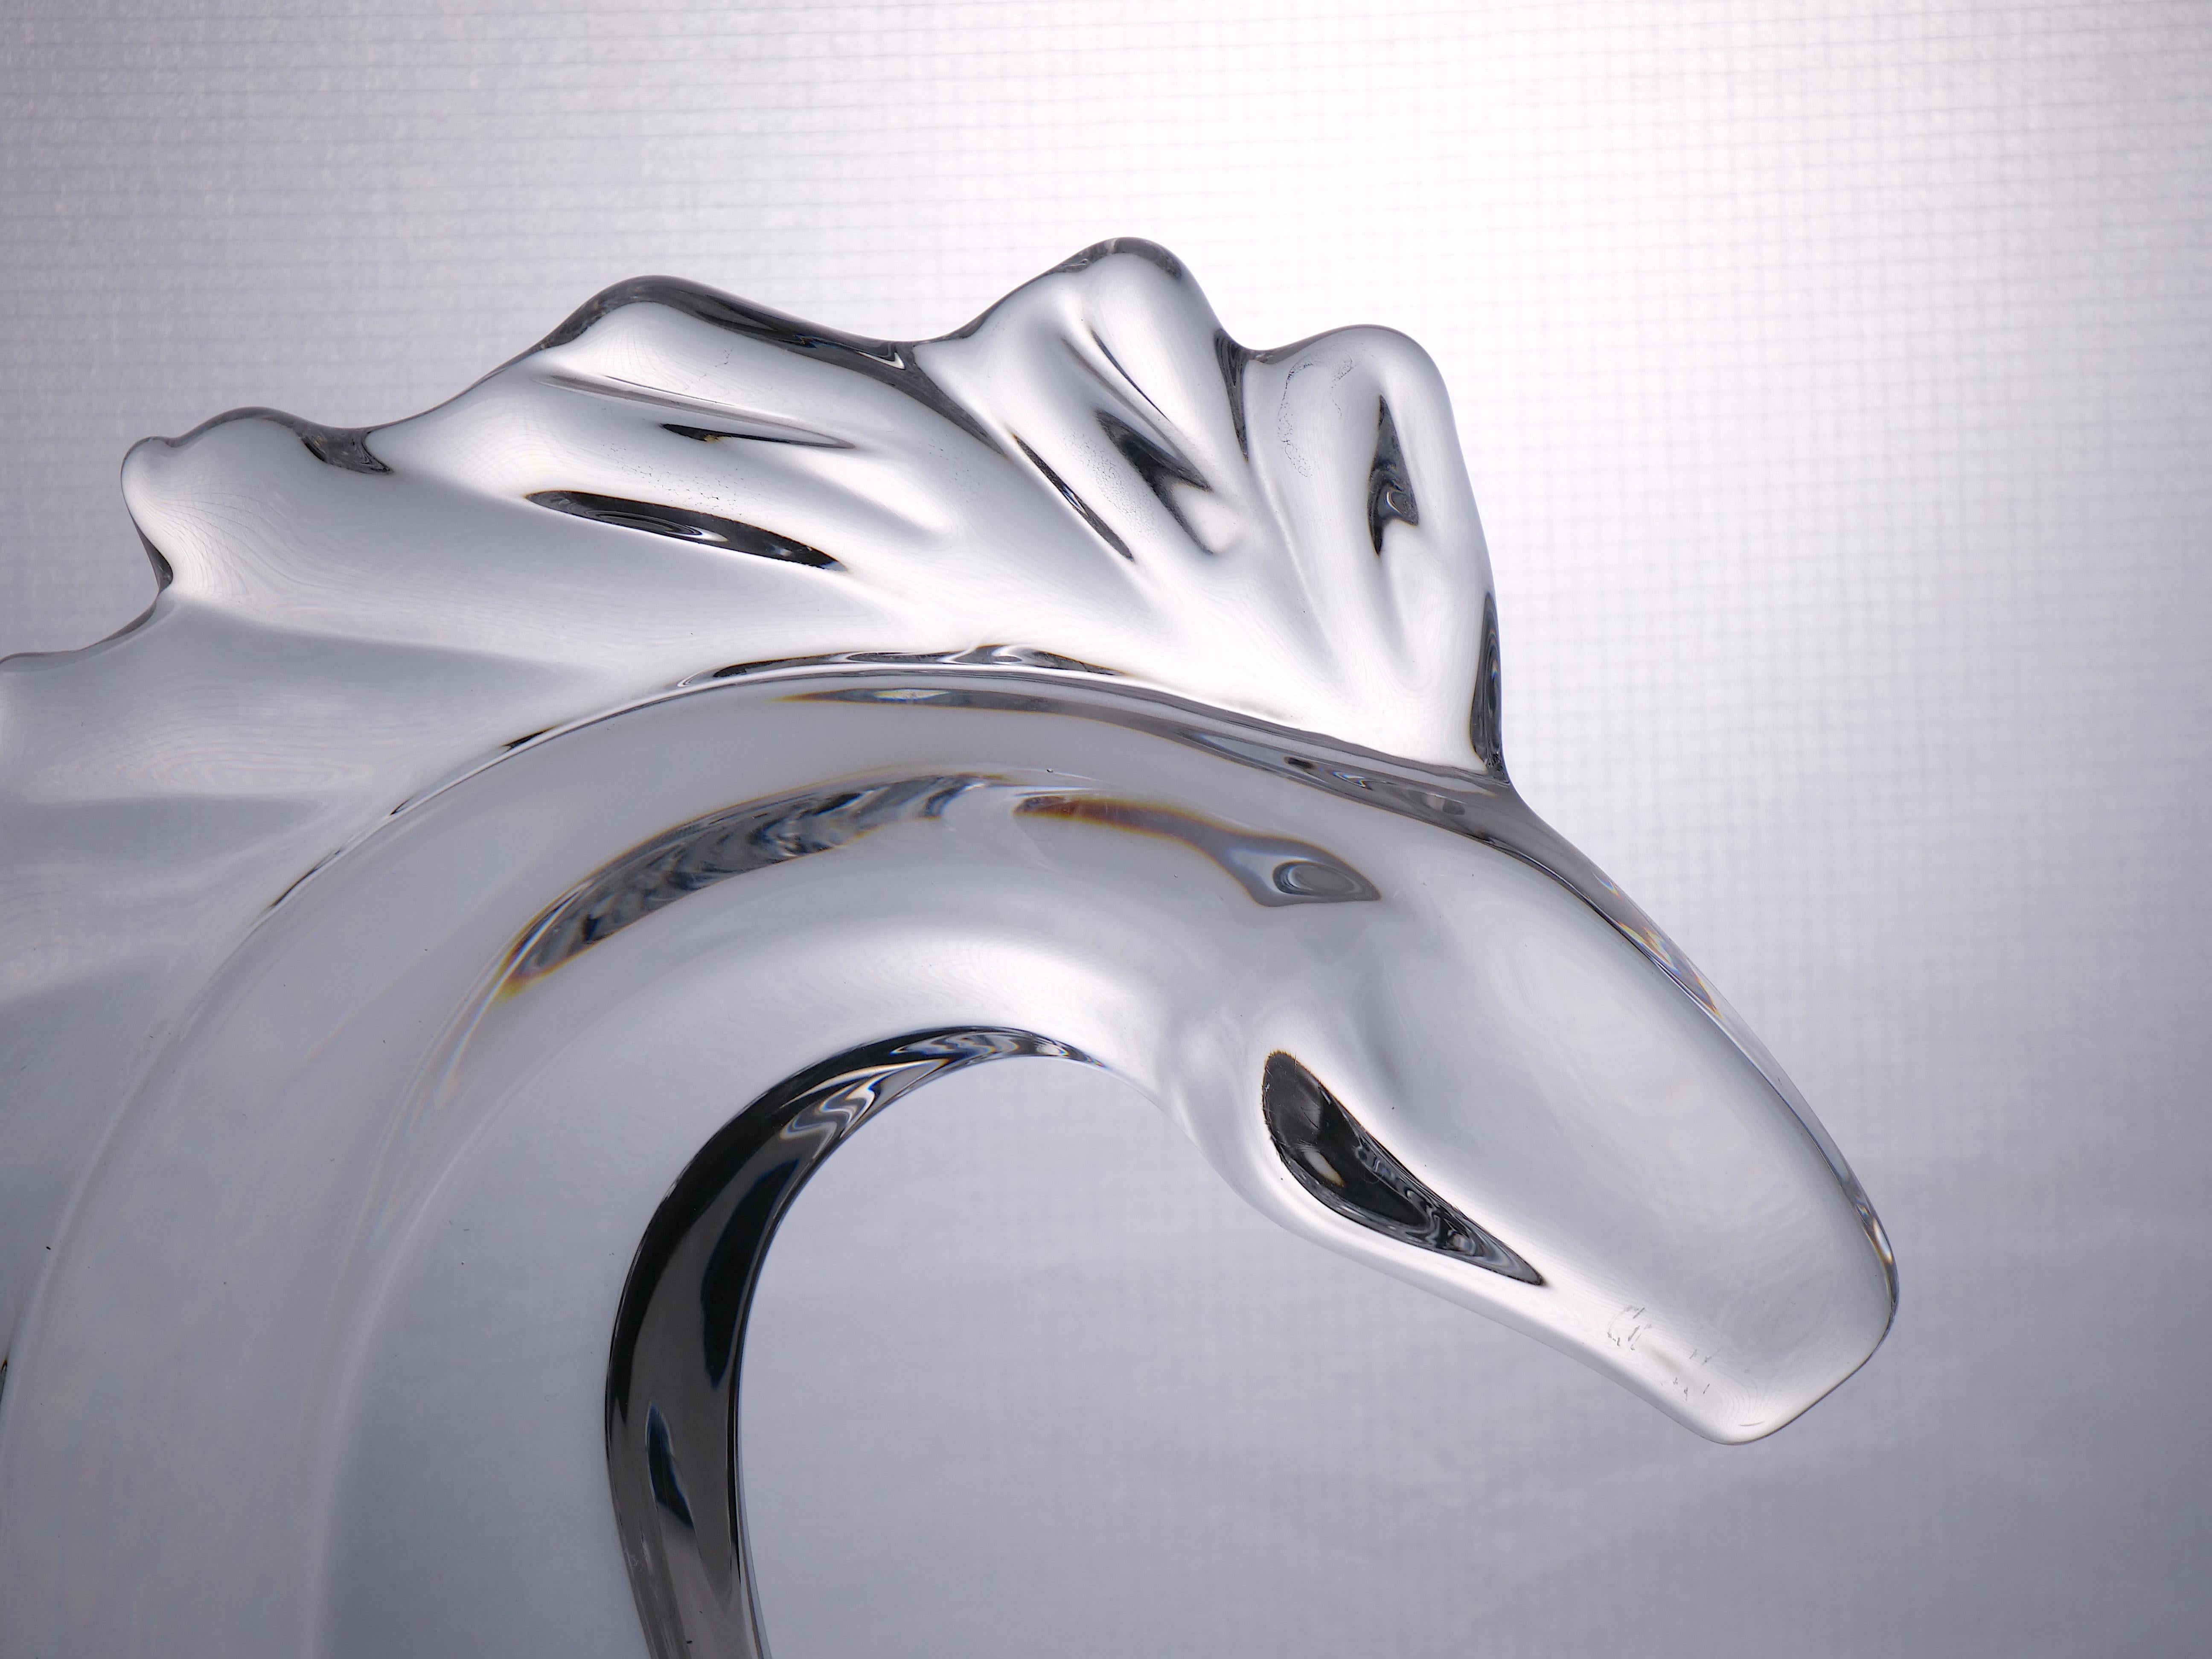 Beautiful and elegant french Daum crystal decorative horse head sculpture. The decorative sculpture feature an art deco style with clean line very pleasing to the eye, resting on a baseless geometric shape. The horse head sculpture is in great